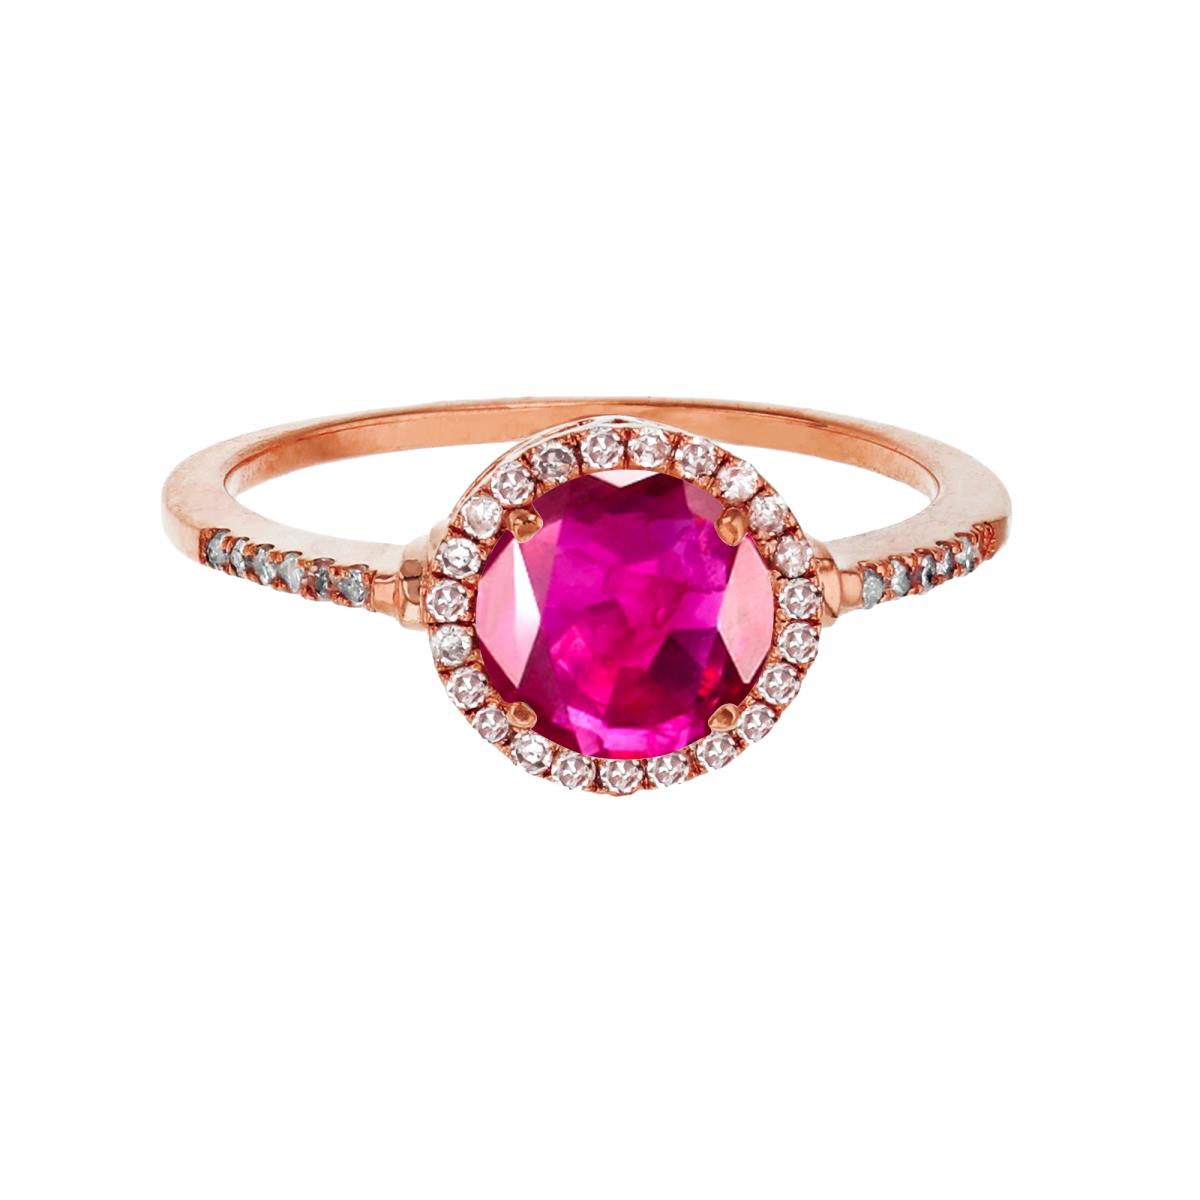 14K Rose Gold 7mm Round Glass Filled Ruby & 0.18 CTTW Diamond Halo Ring